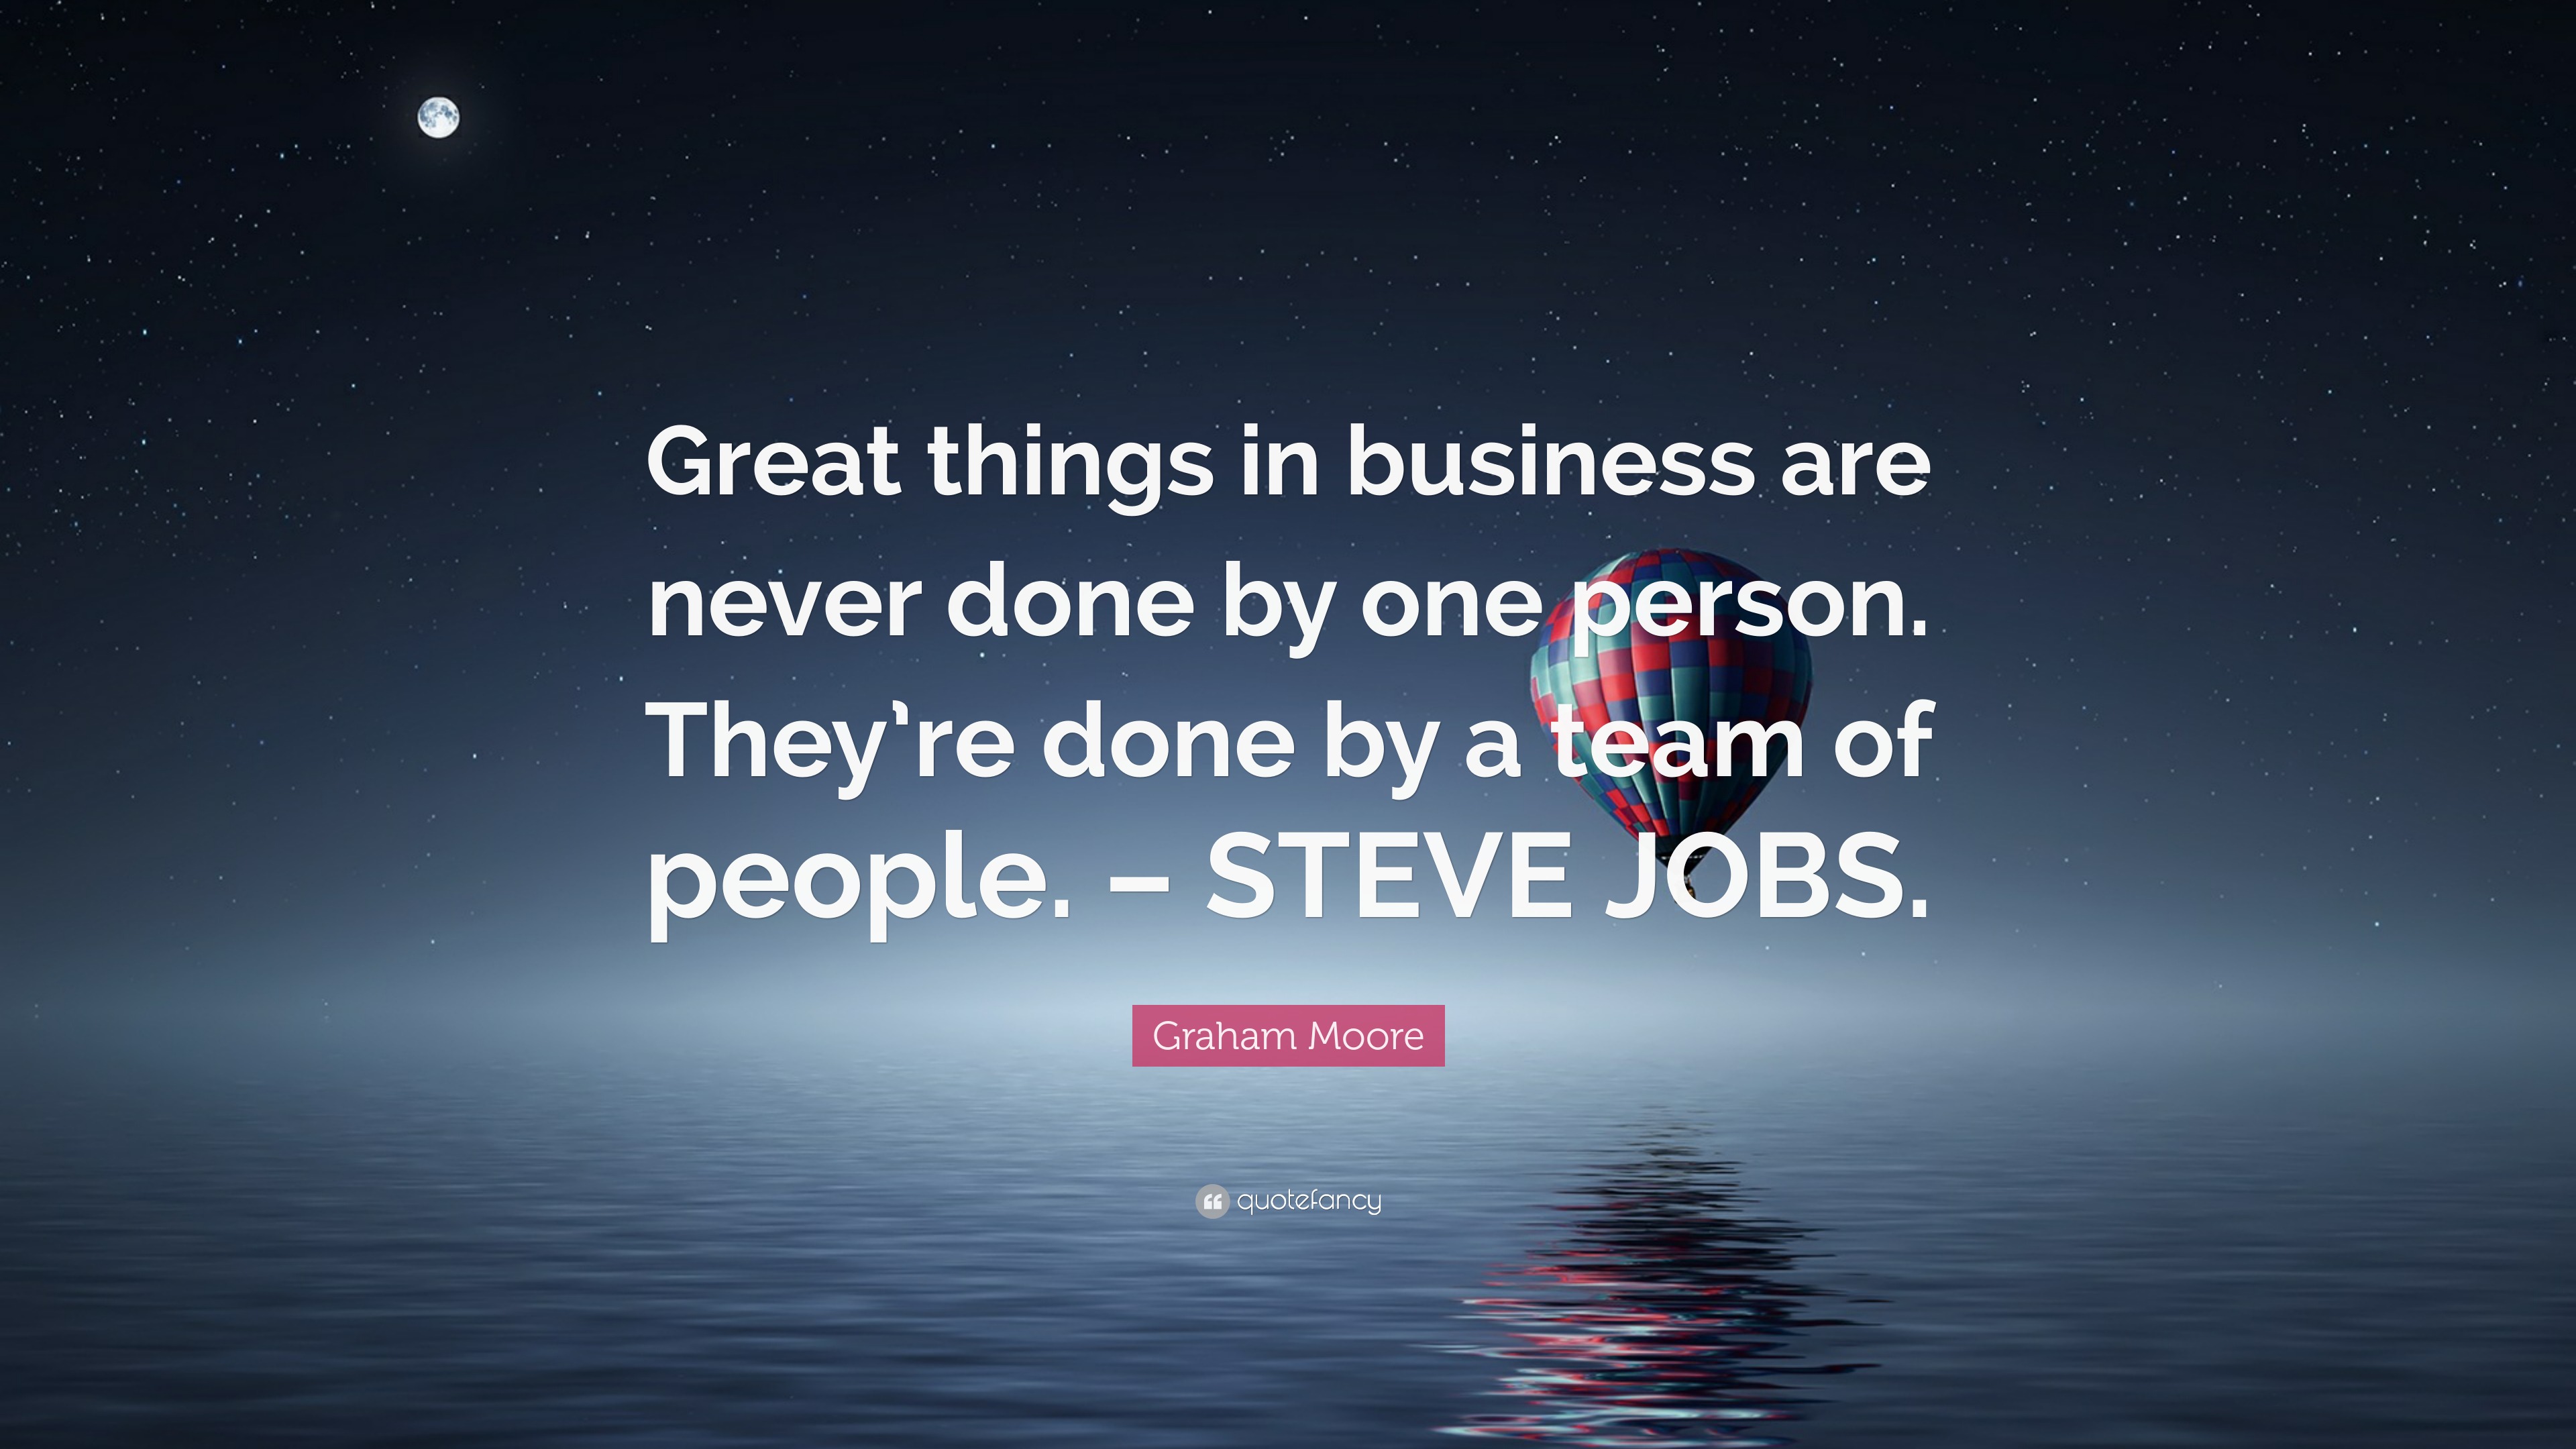 Graham Moore Quote: “Great things in business are never done by one ...